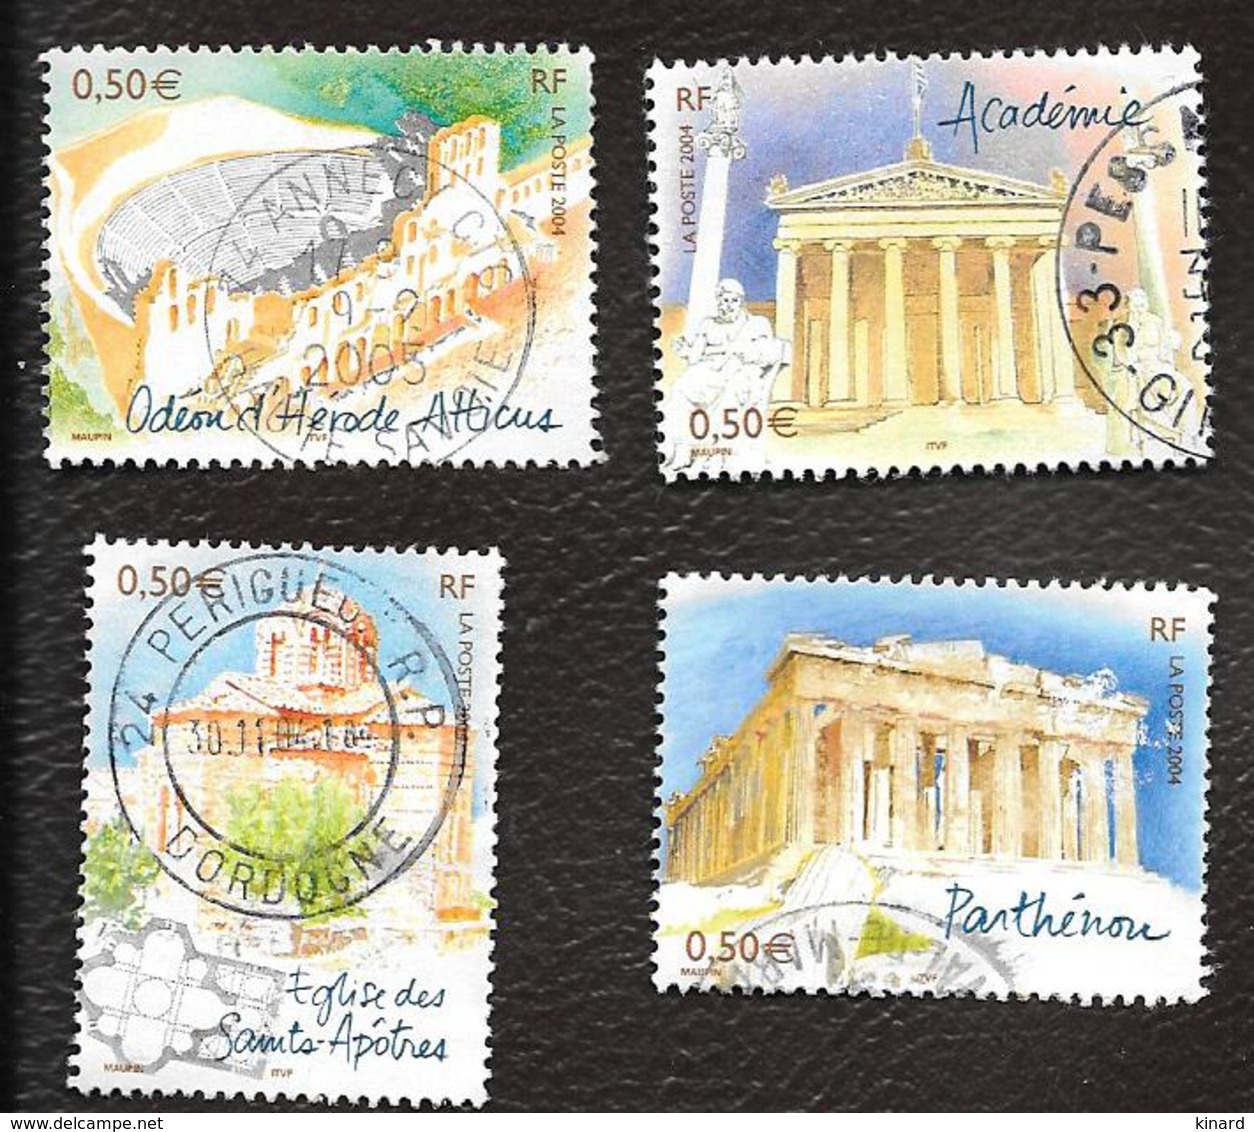 TIMBRES  FRANCE ..OBLITERATION RONDE...2004...CAPITALE ATHENES.. N°3718/3721...TBE. - Gebruikt